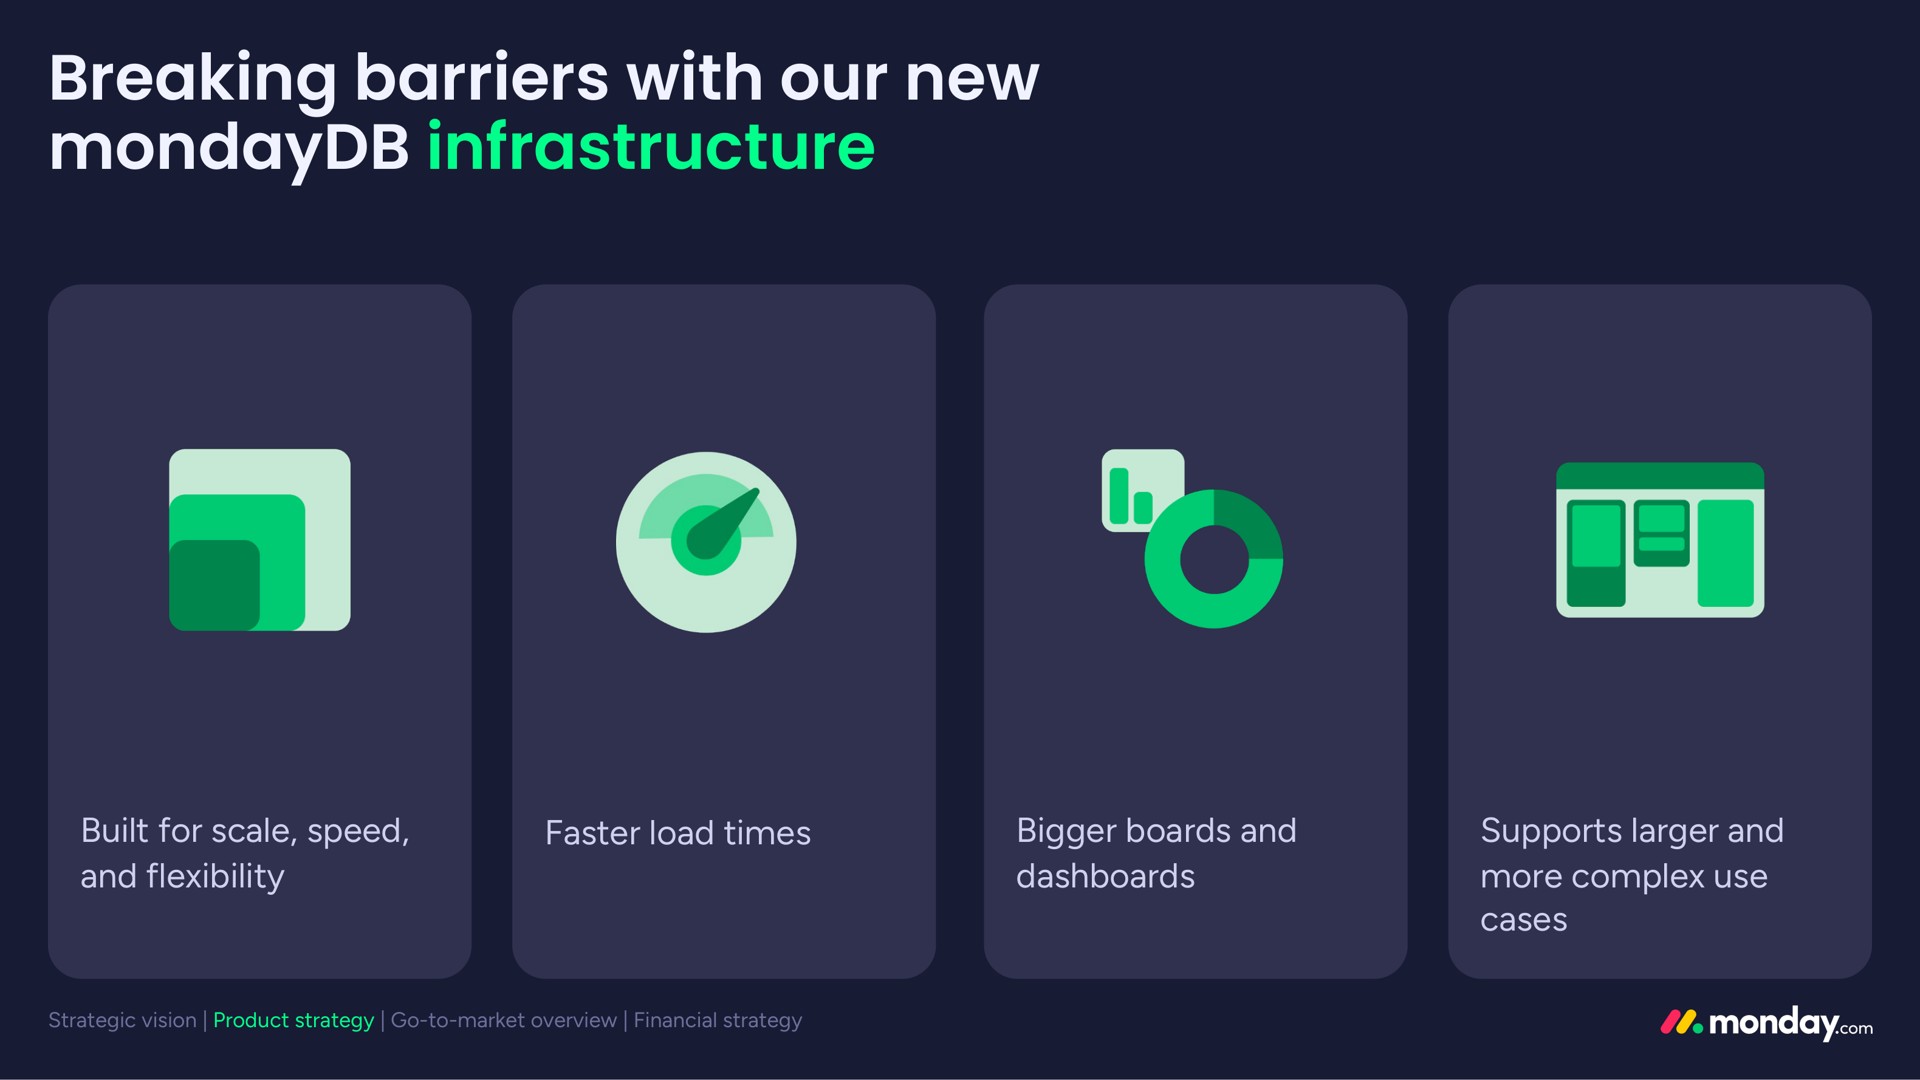 breaking barriers with our new infrastructure | monday.com